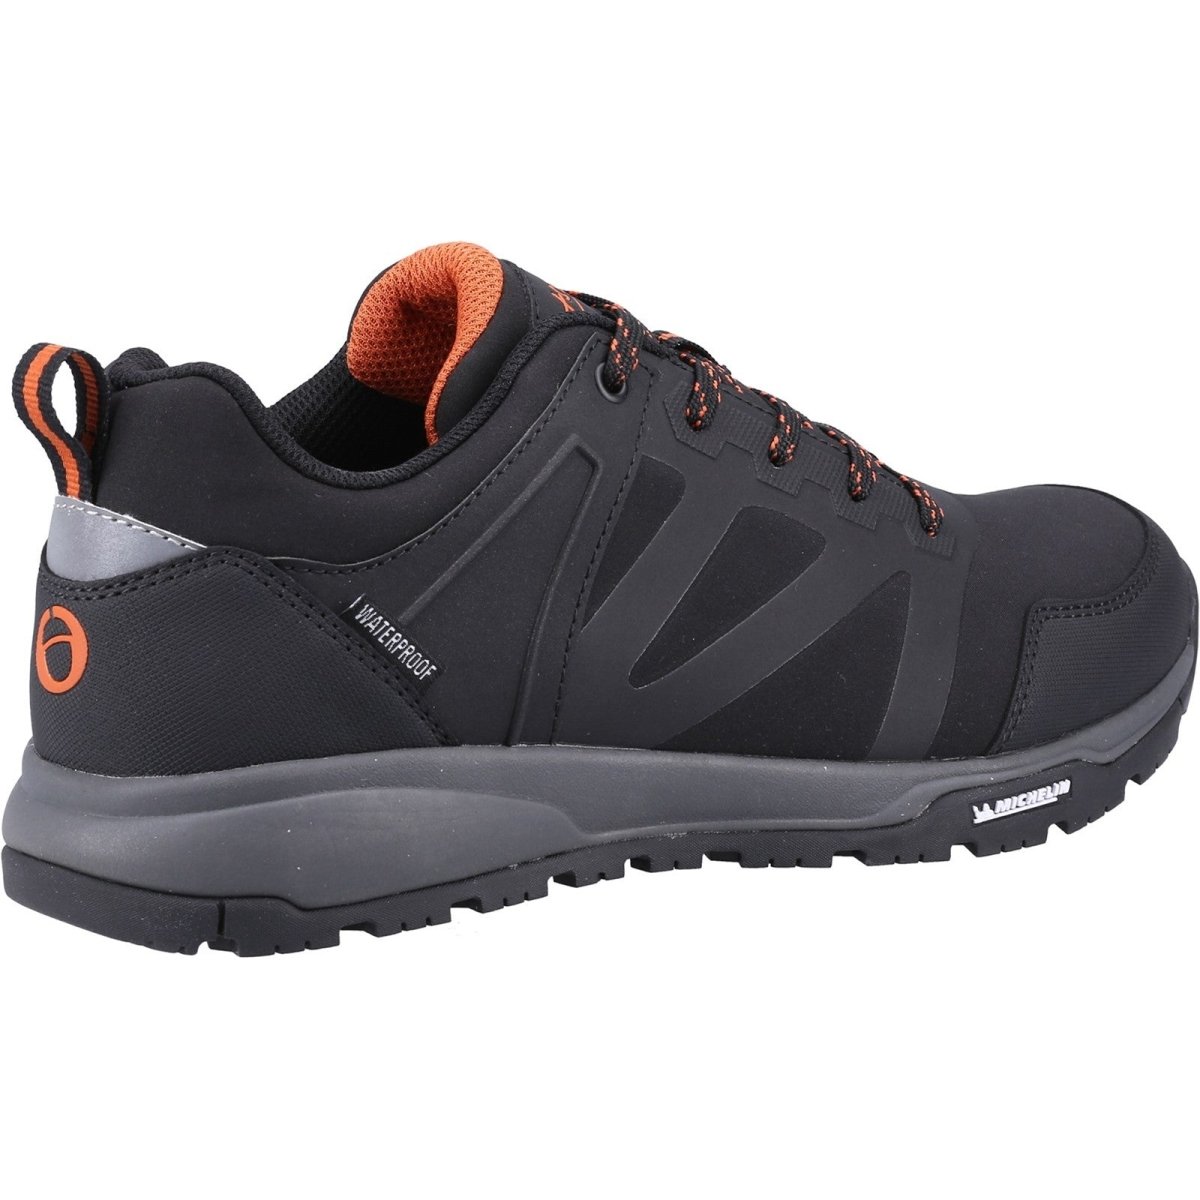 Cotswold Kingham Low Mens Waterproof Hiking Trainers - Shoe Store Direct